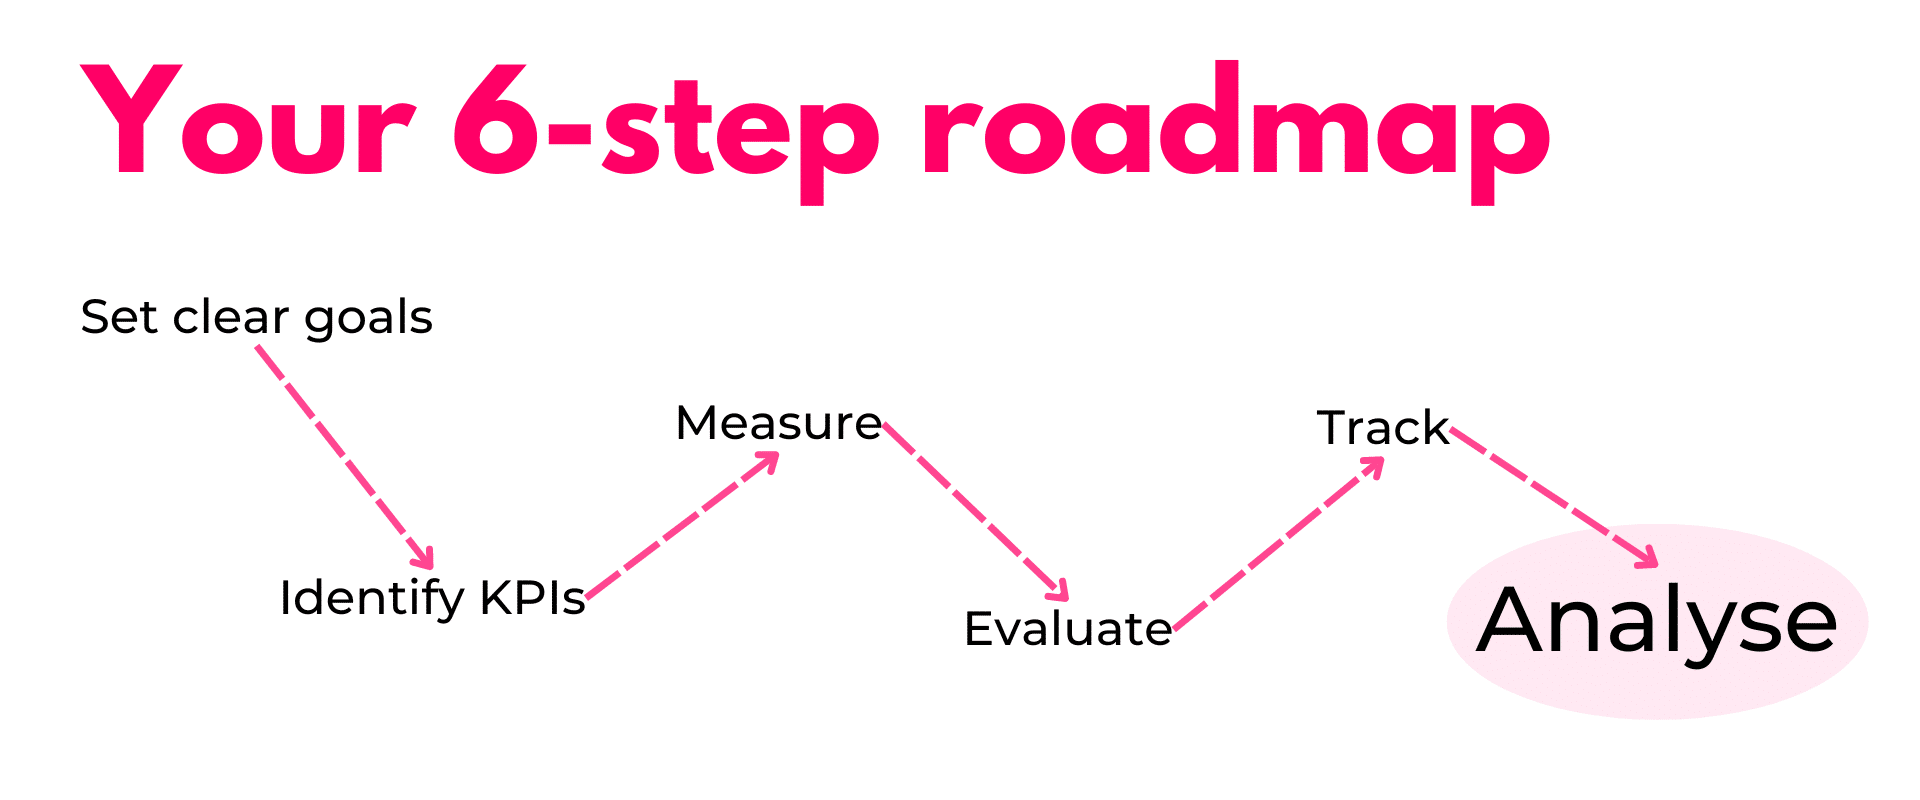 Your 6 step roadmap.